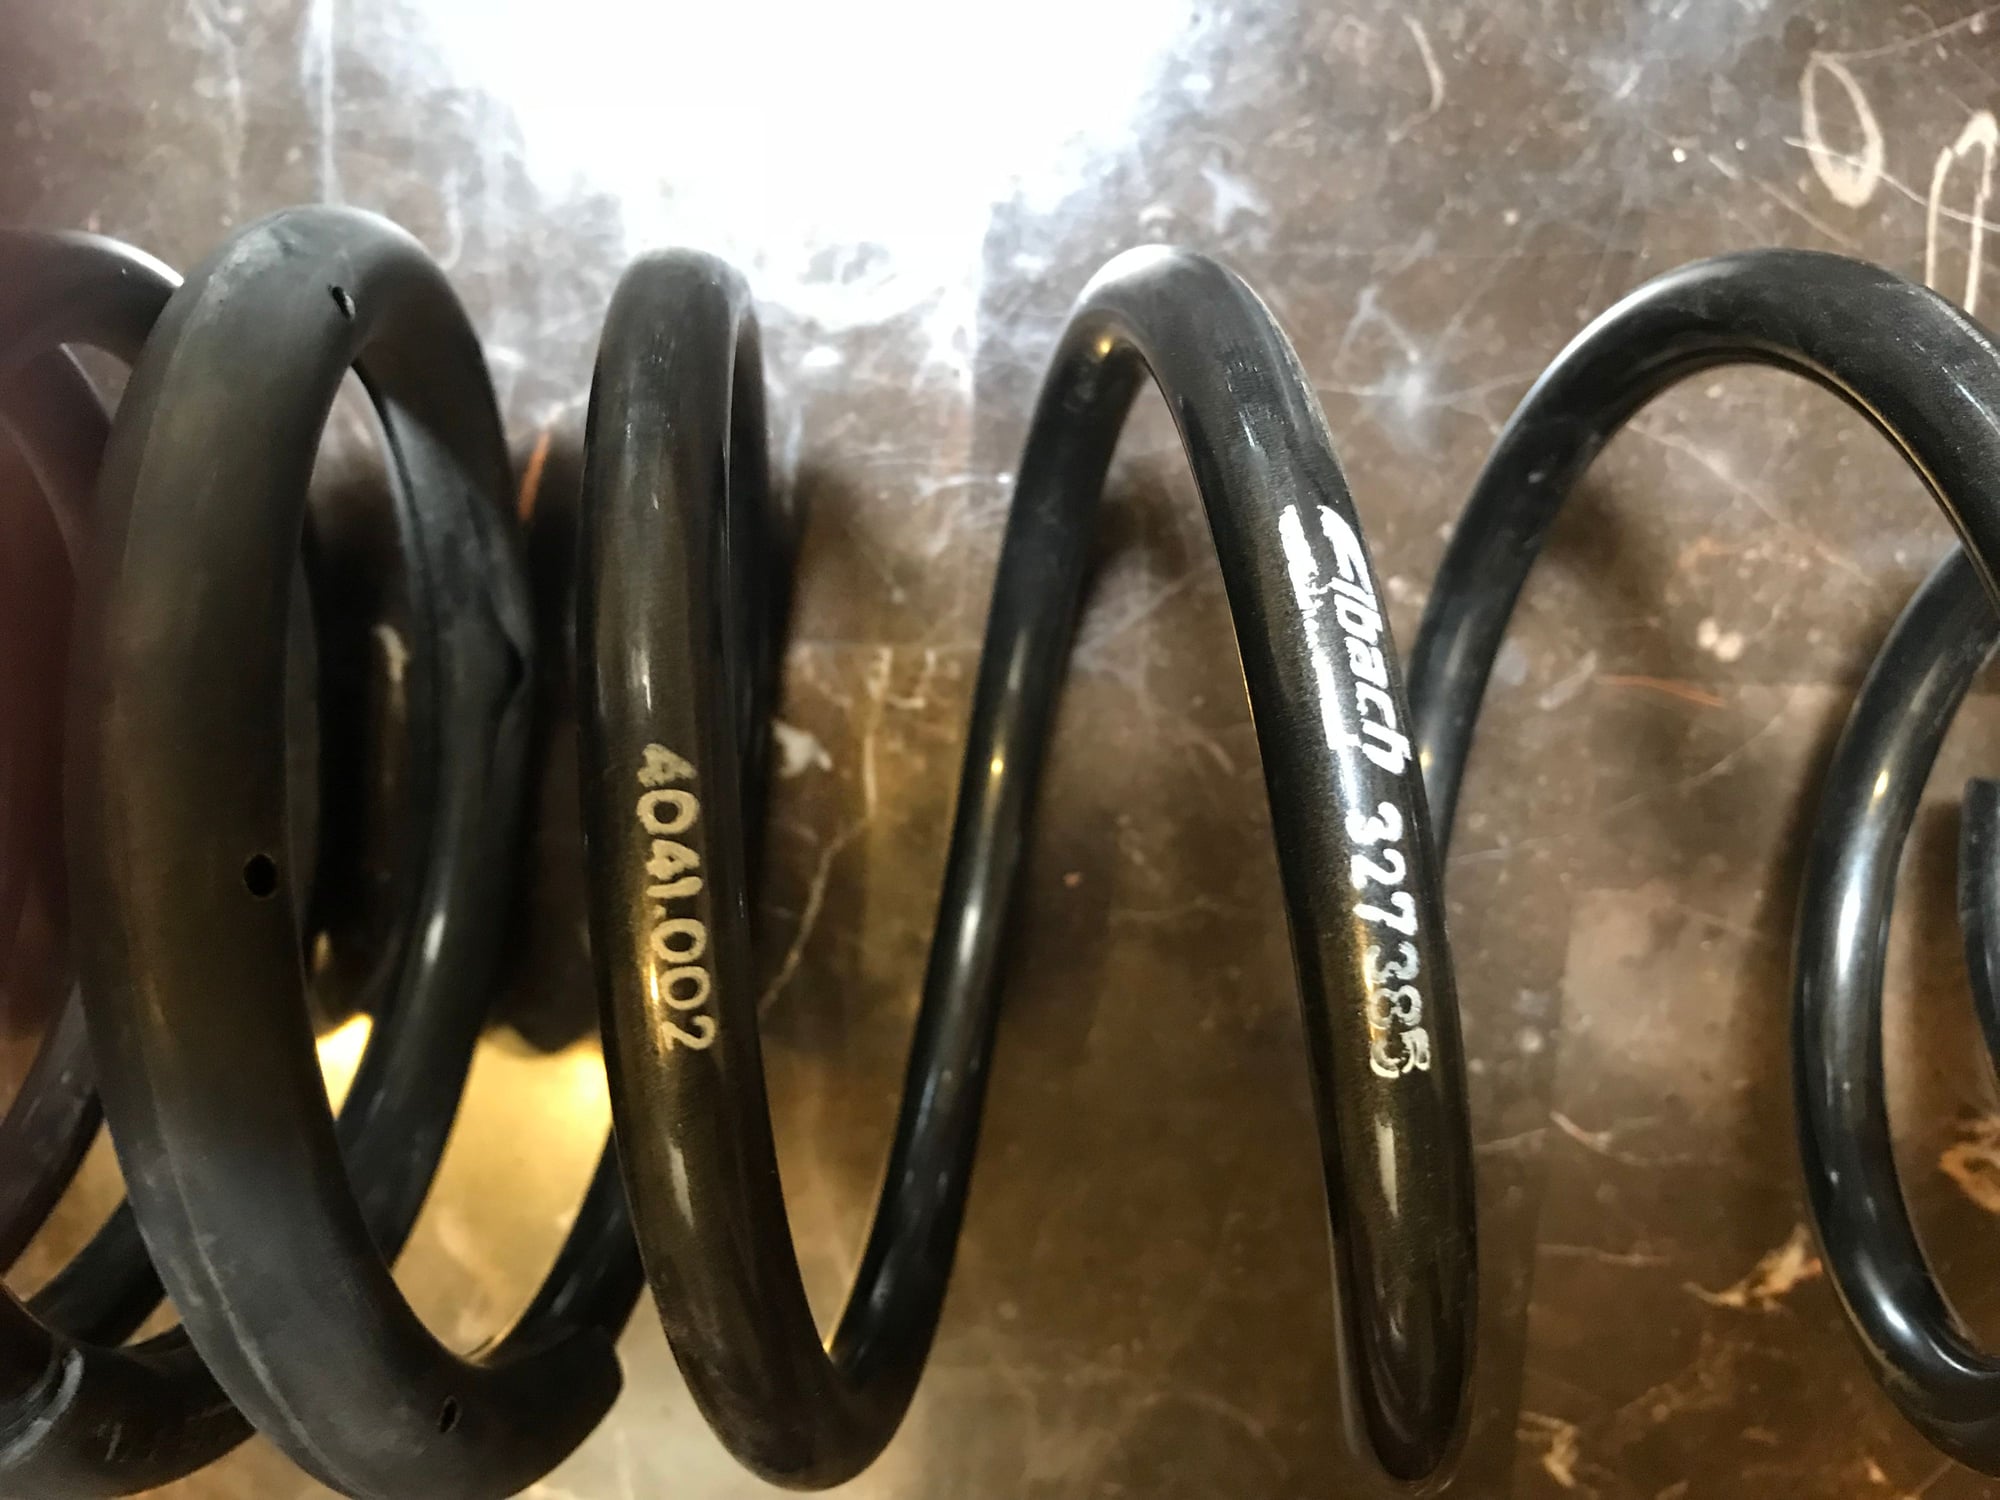 Steering/Suspension - SOLD: EIBACH 4041.140 Pro-Kit Lowering Springs - Used - 1999 to 2003 Acura CL - 1999 to 2003 Acura TL - 1995 to 2003 Honda Accord - Plano, TX 75023, United States